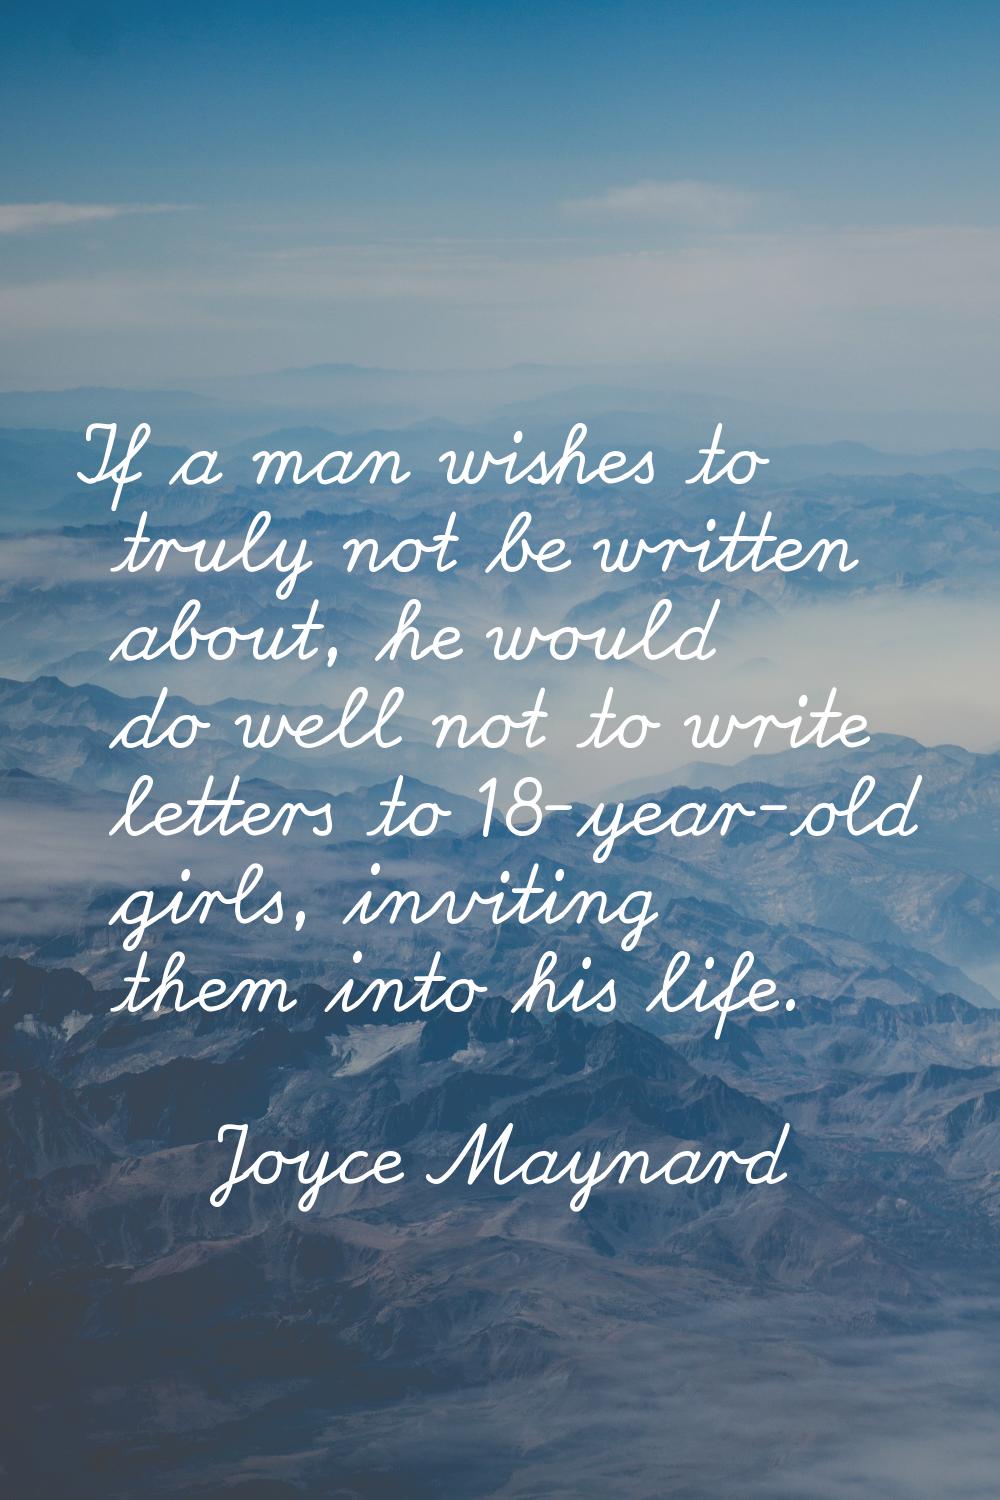 If a man wishes to truly not be written about, he would do well not to write letters to 18-year-old